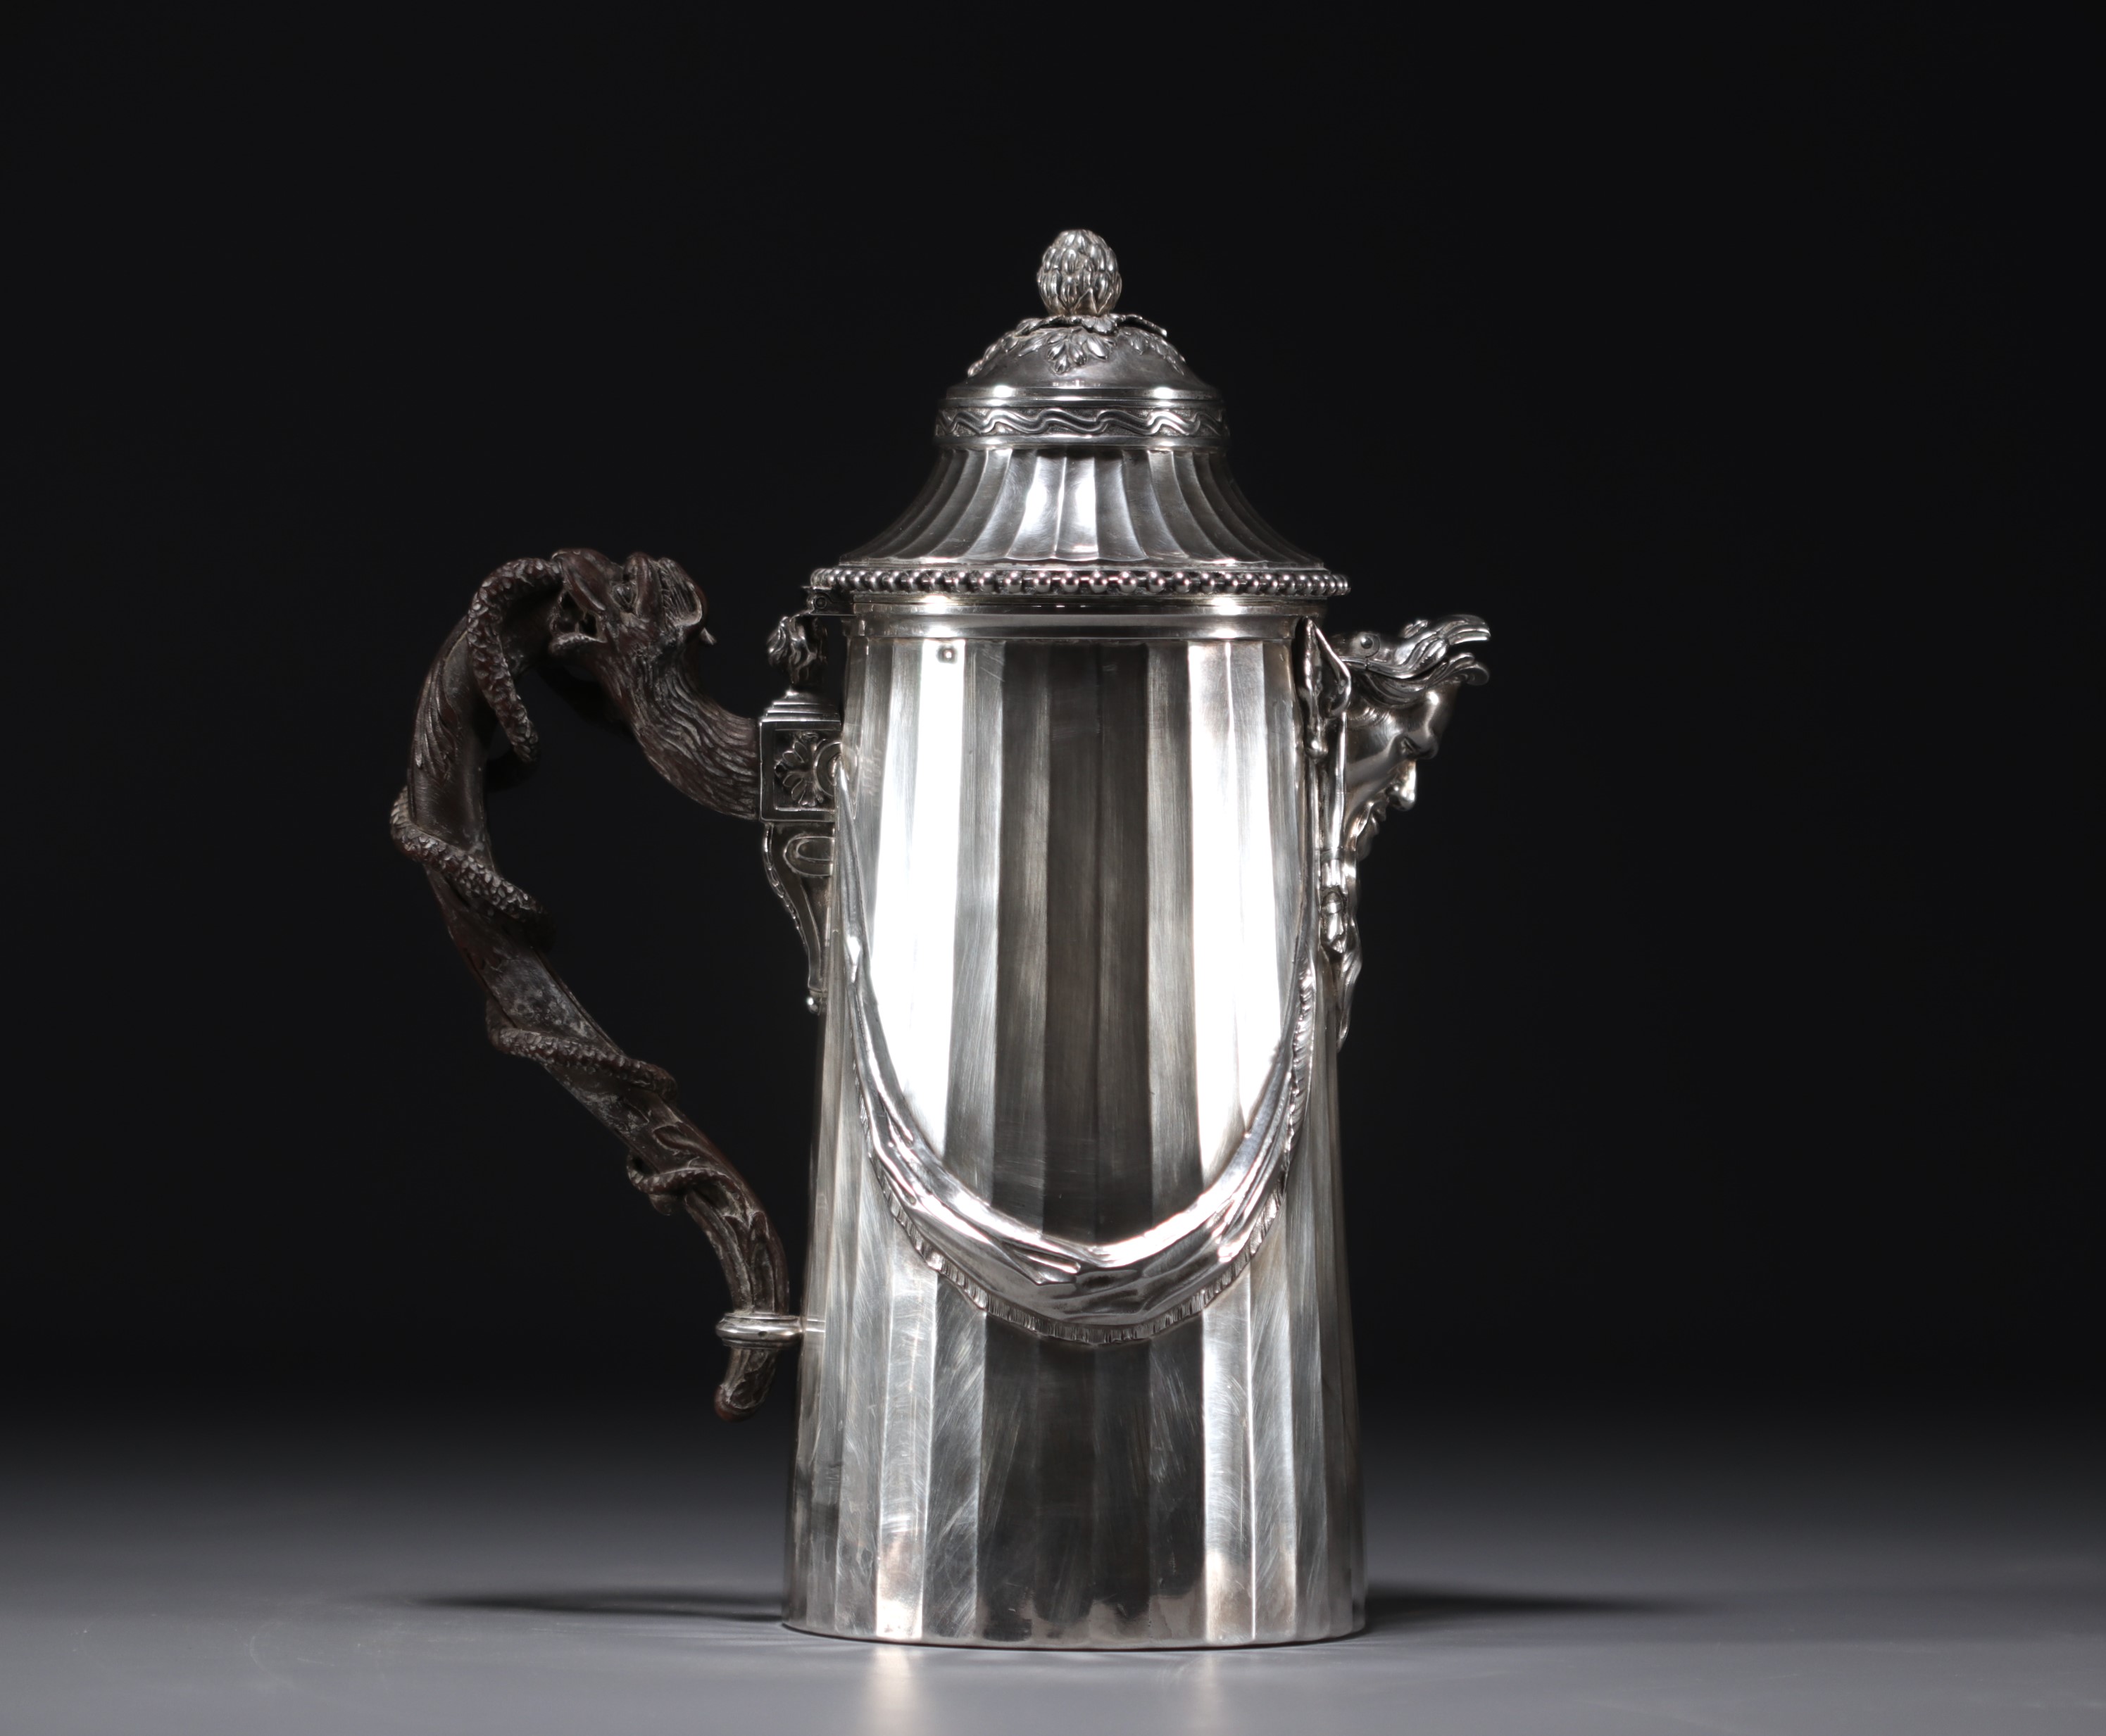 Antoine CARDEILHAC - Exceptional Regency-style solid silver service, 19th century. - Image 3 of 15